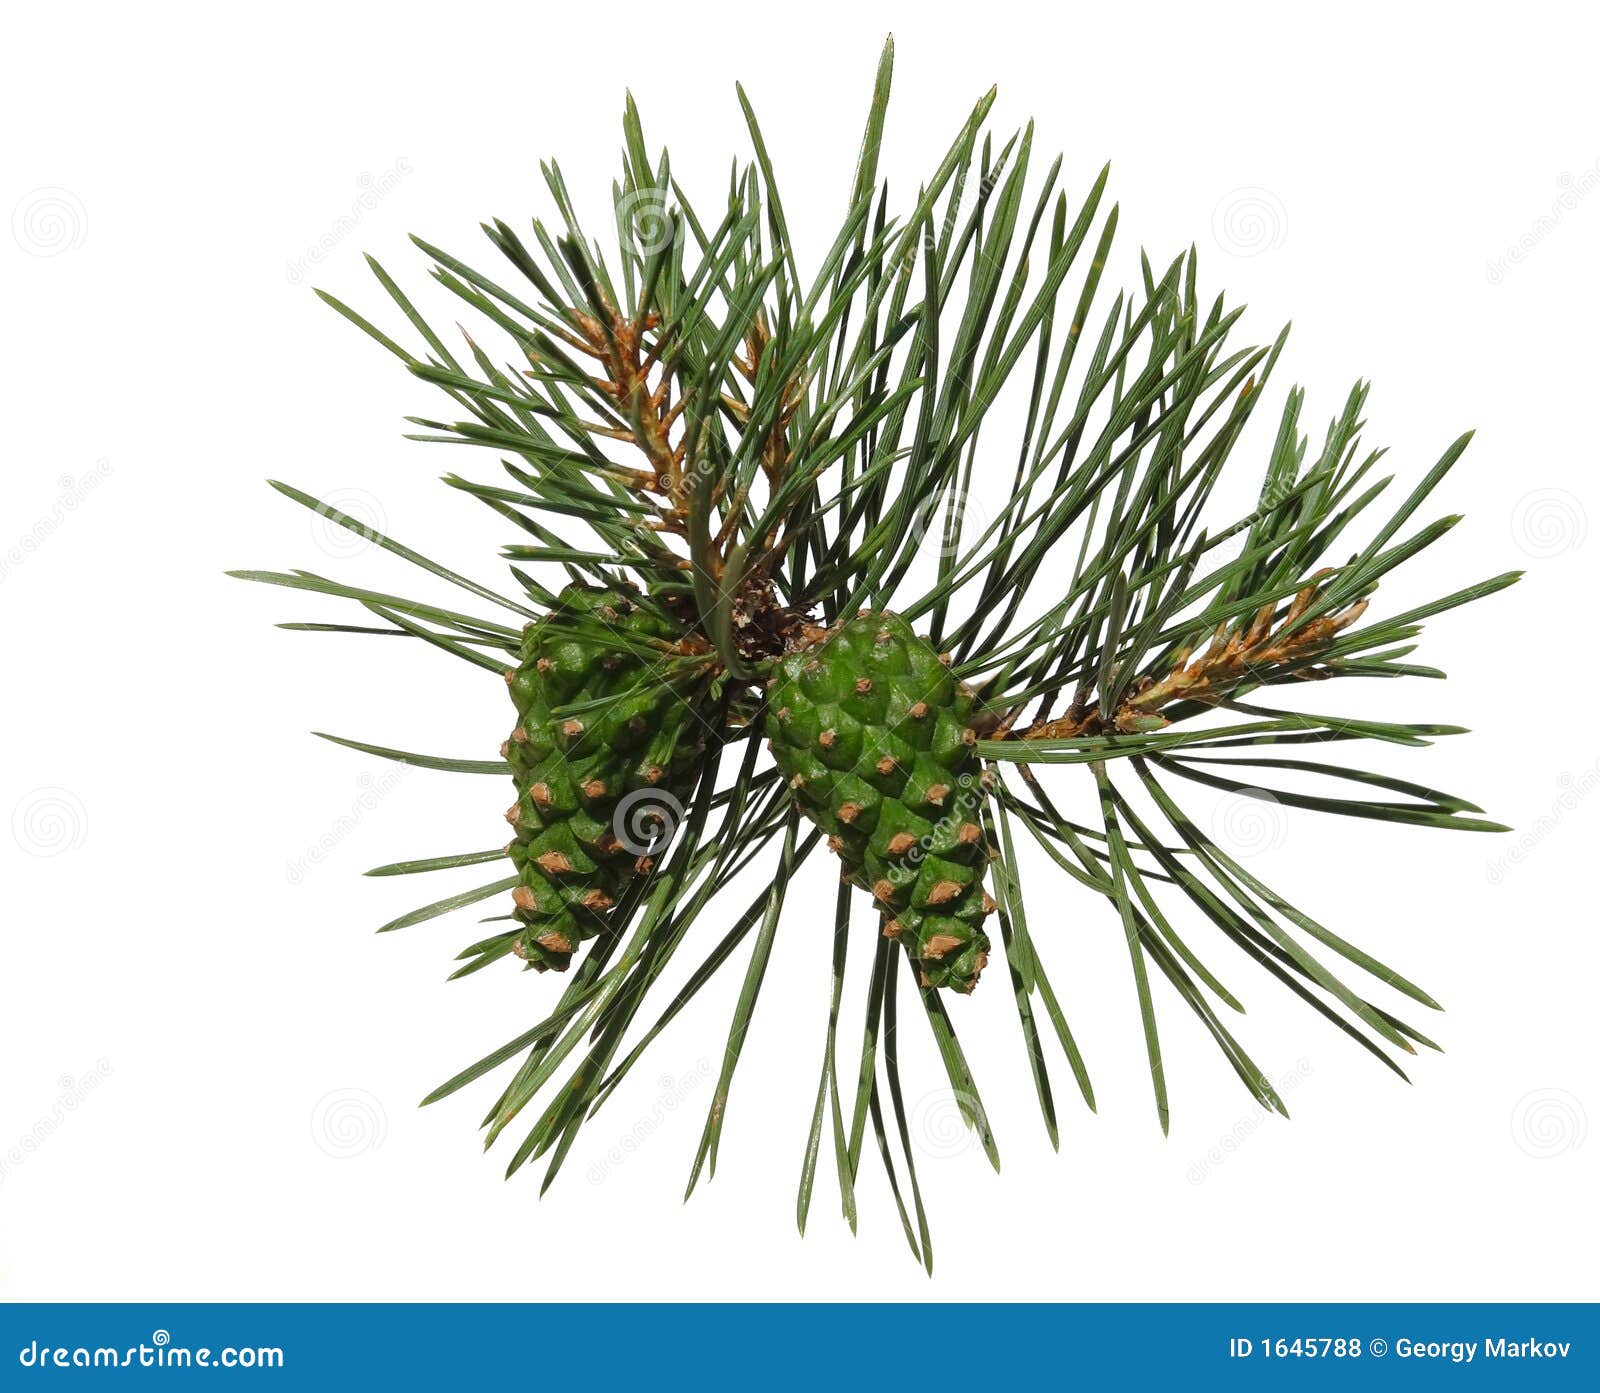 pine shoot with two cones